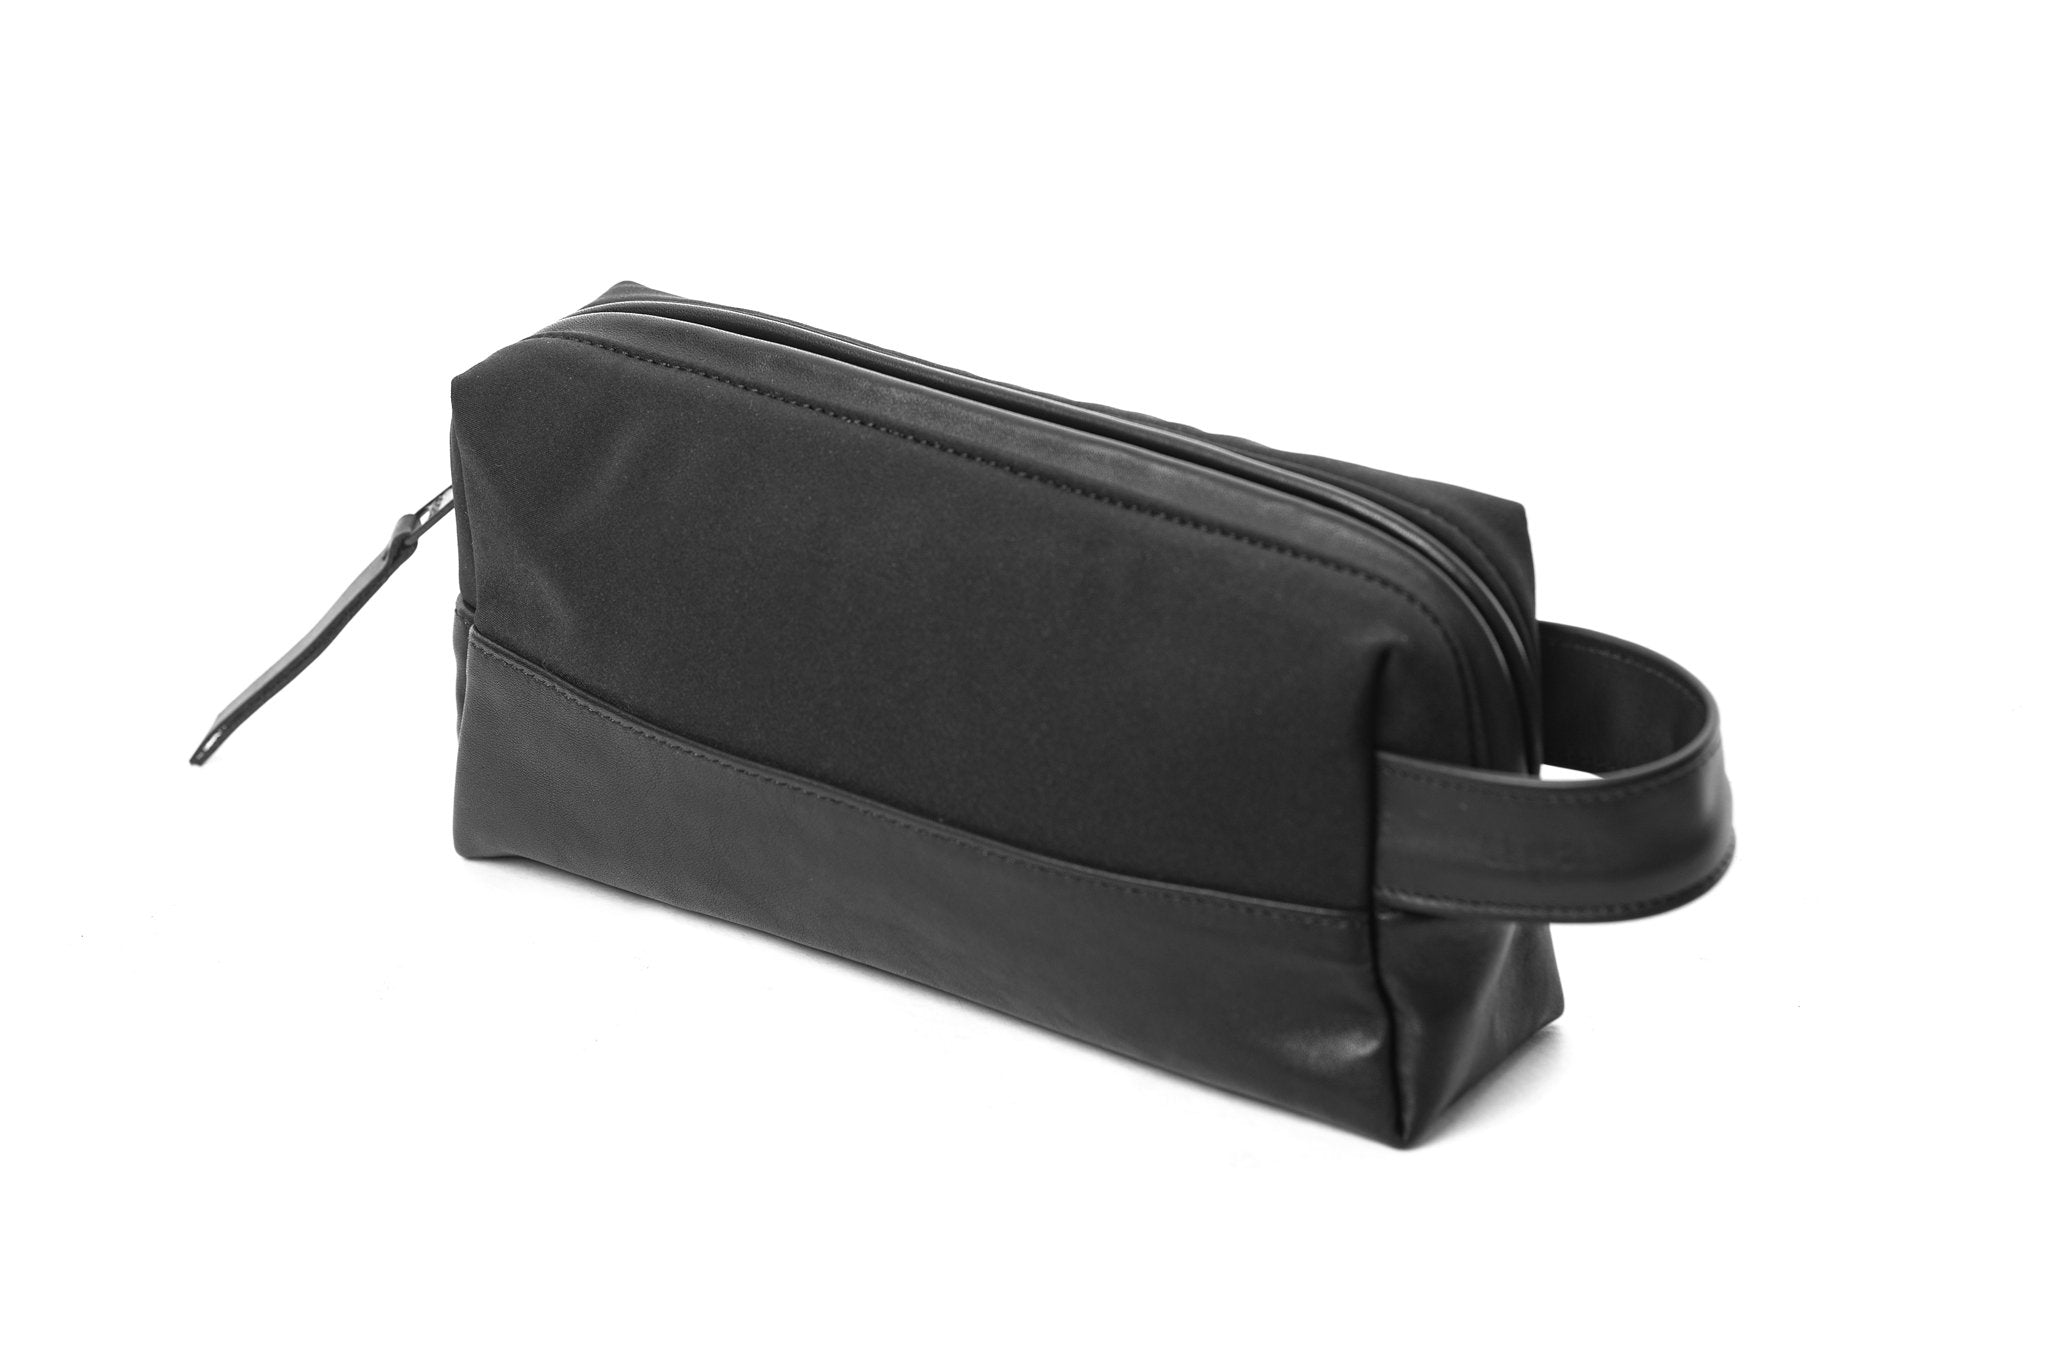 SCENT Beauty Case Small-Black - theabags